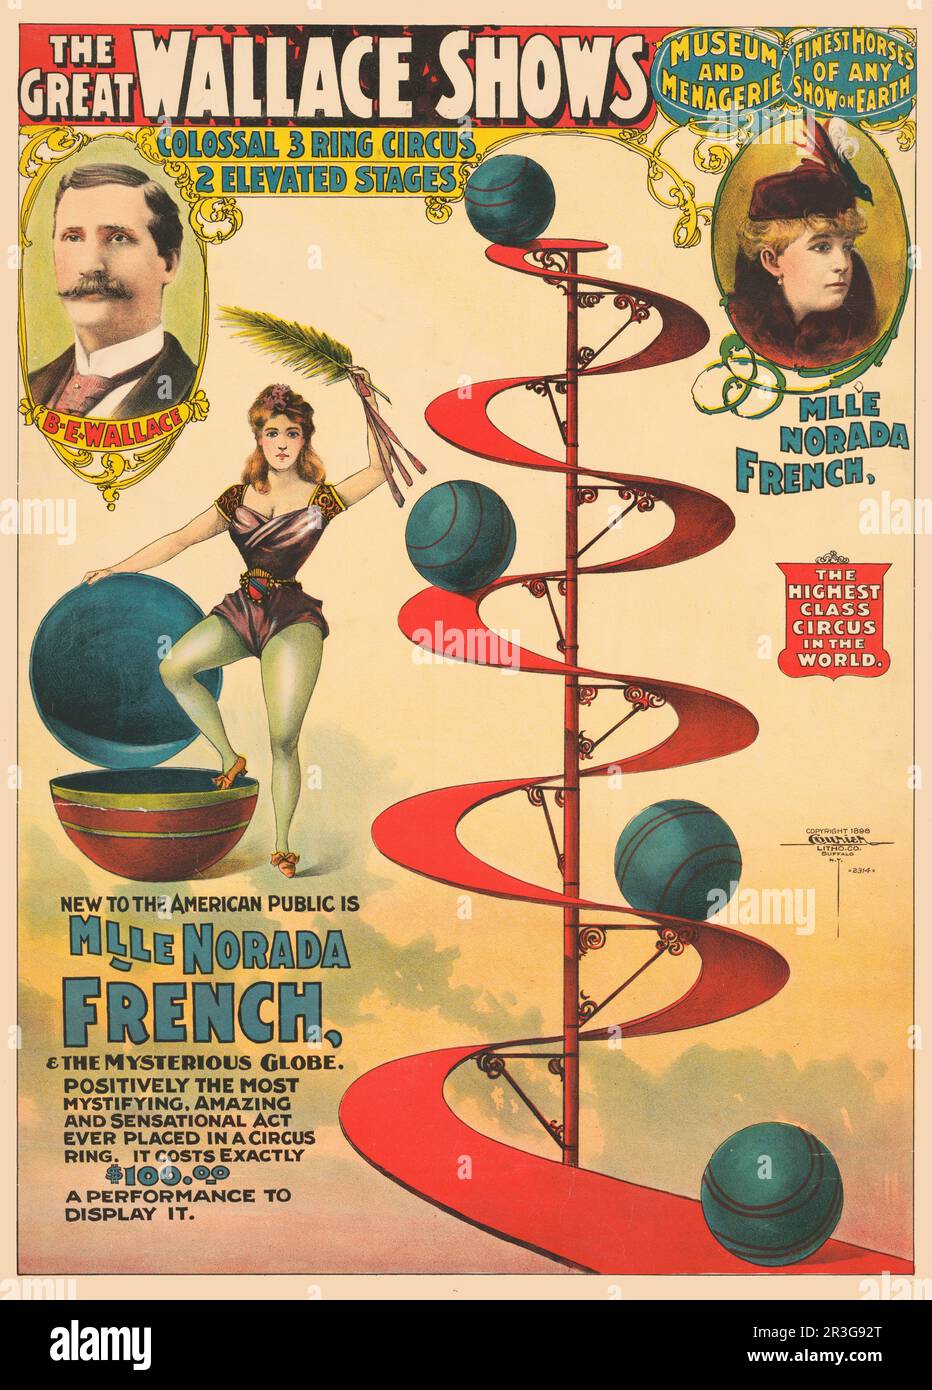 Vintage poster advertising The Great Wallace Shows circus, showing the act of M'lle Norada French, circa 1898. Stock Photo